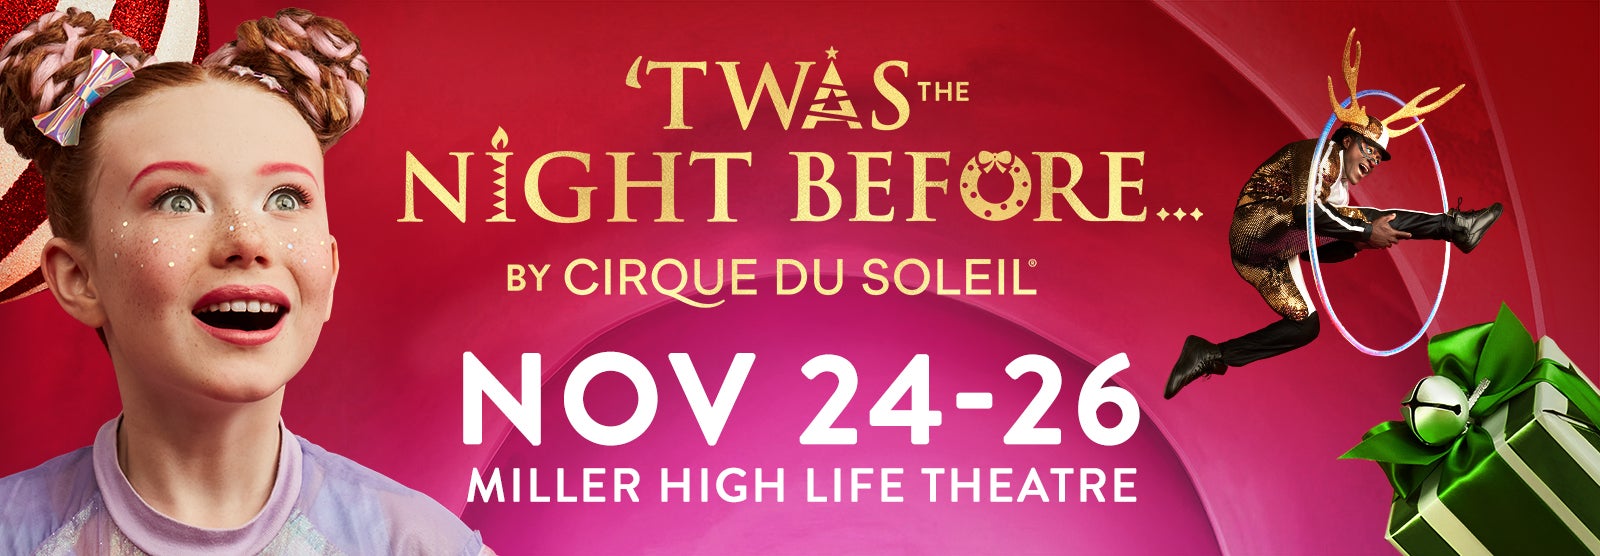 'Twas The Night Before... By Cirque du Soleil